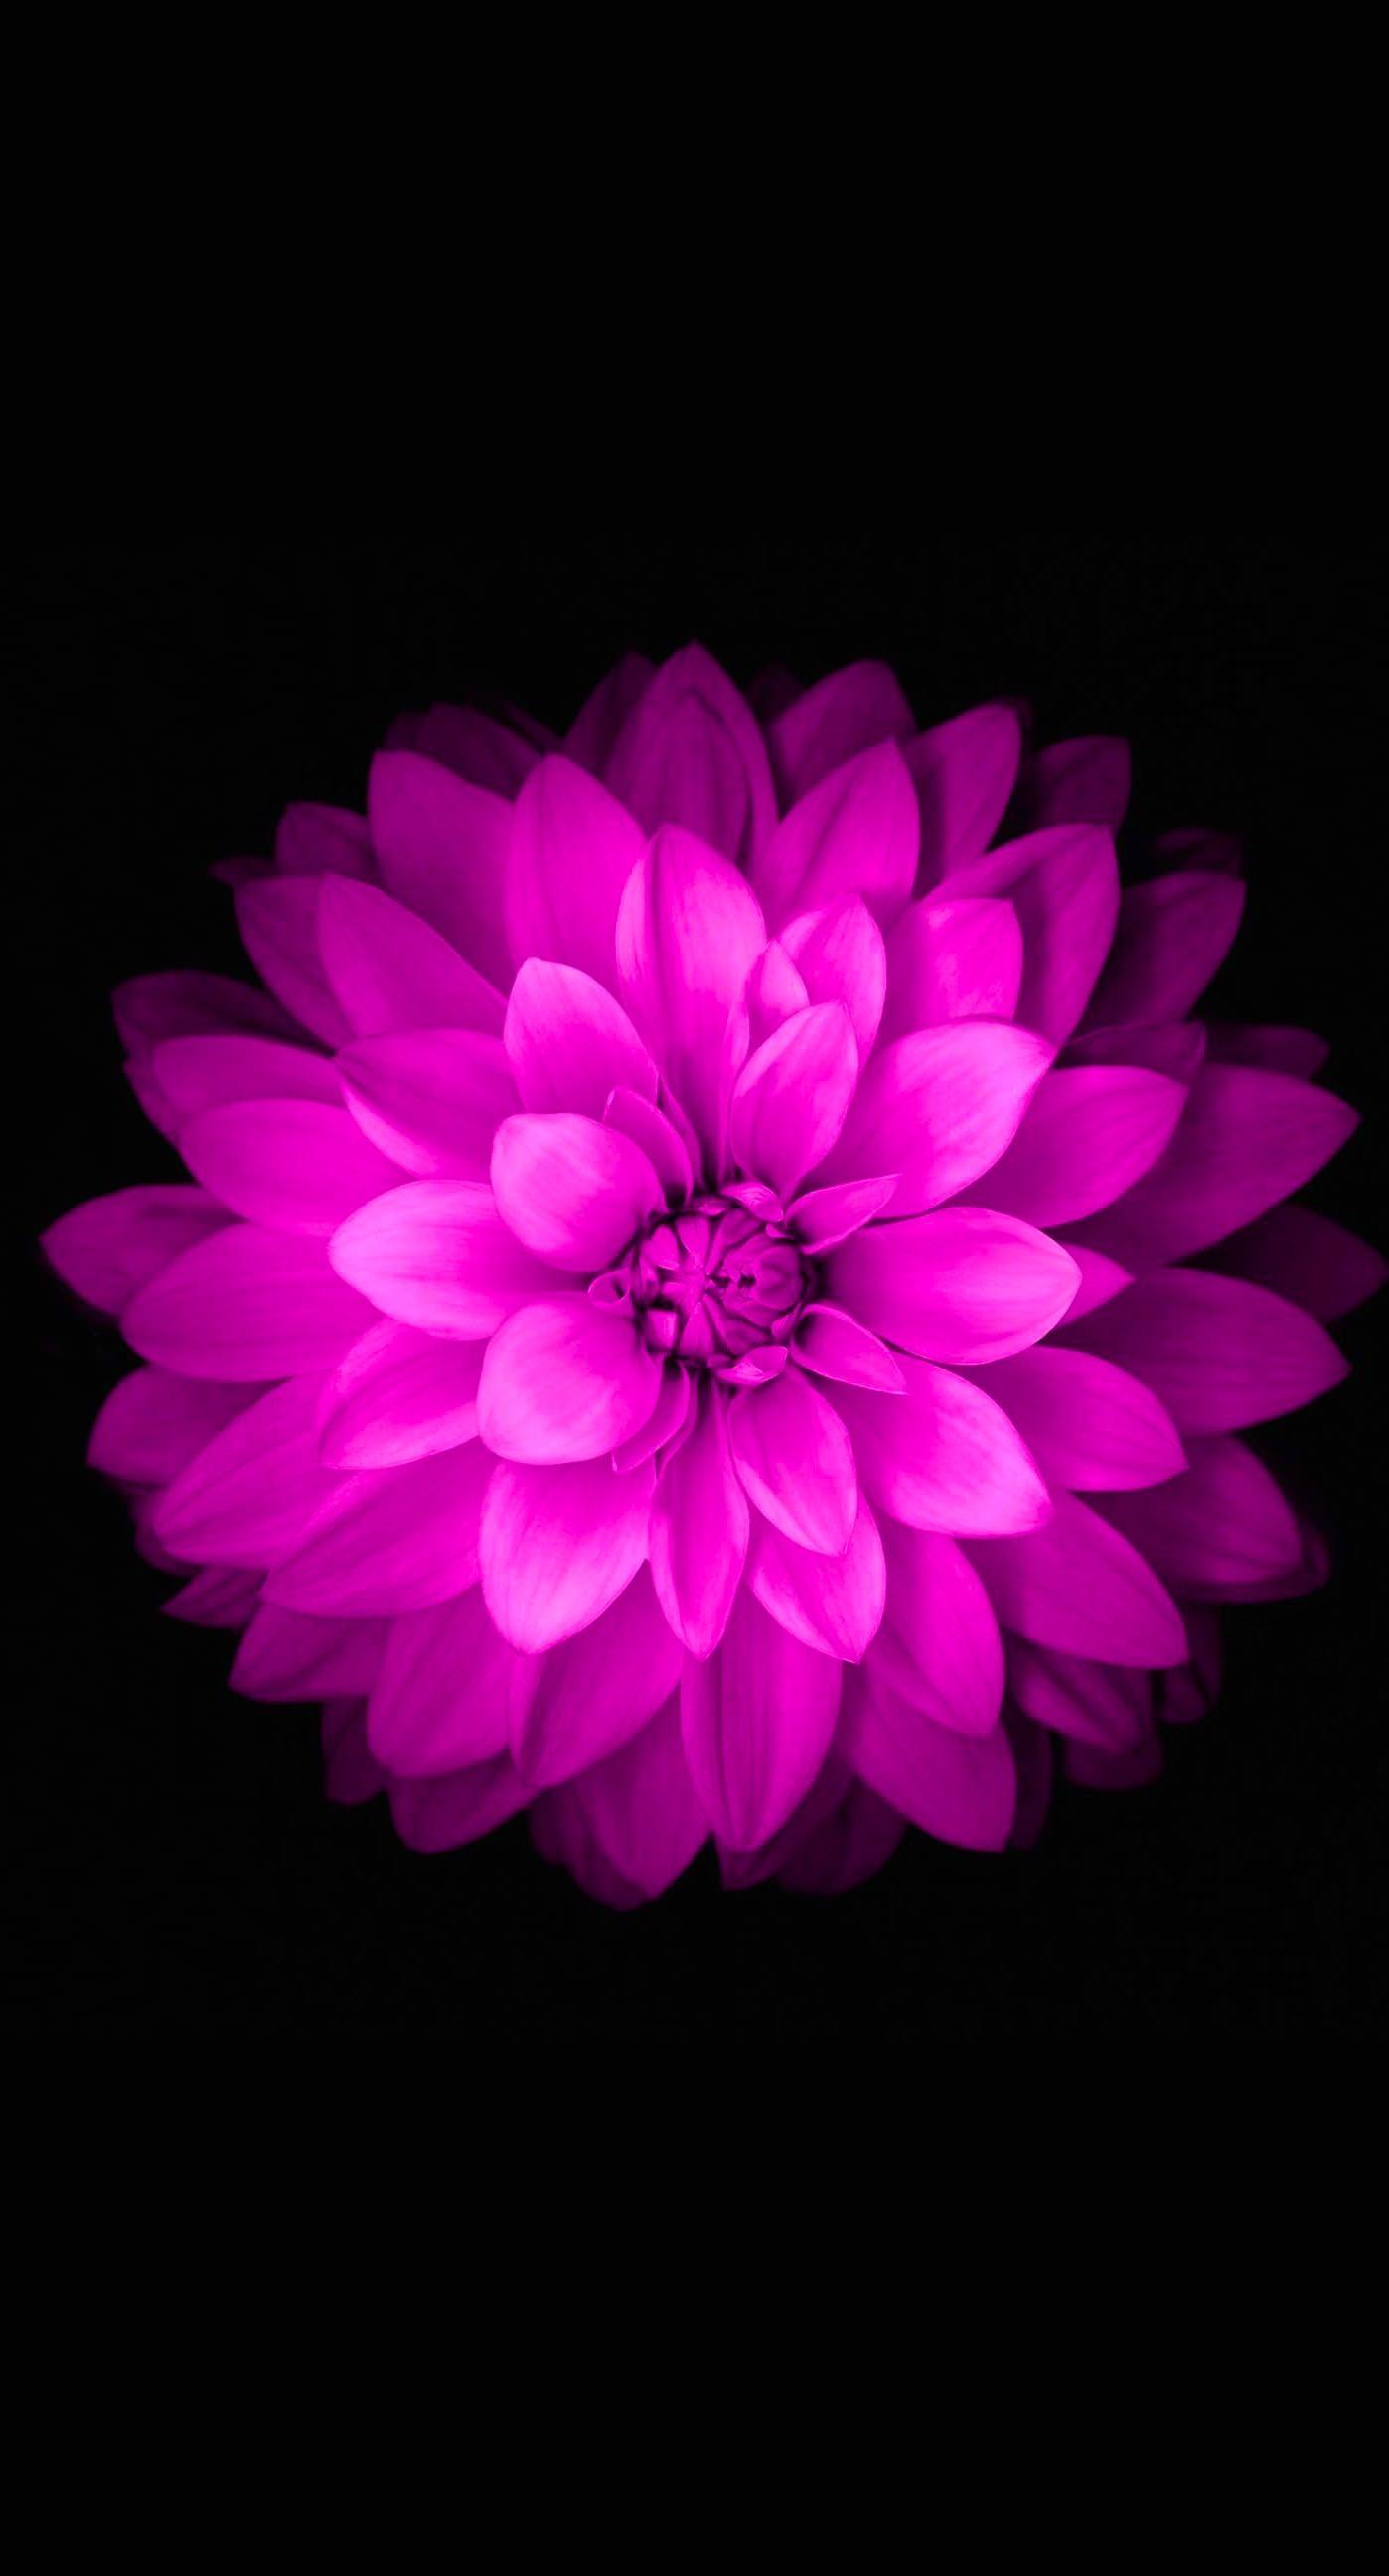 99 Wallpaper For Iphone With Flowers free Download - MyWeb